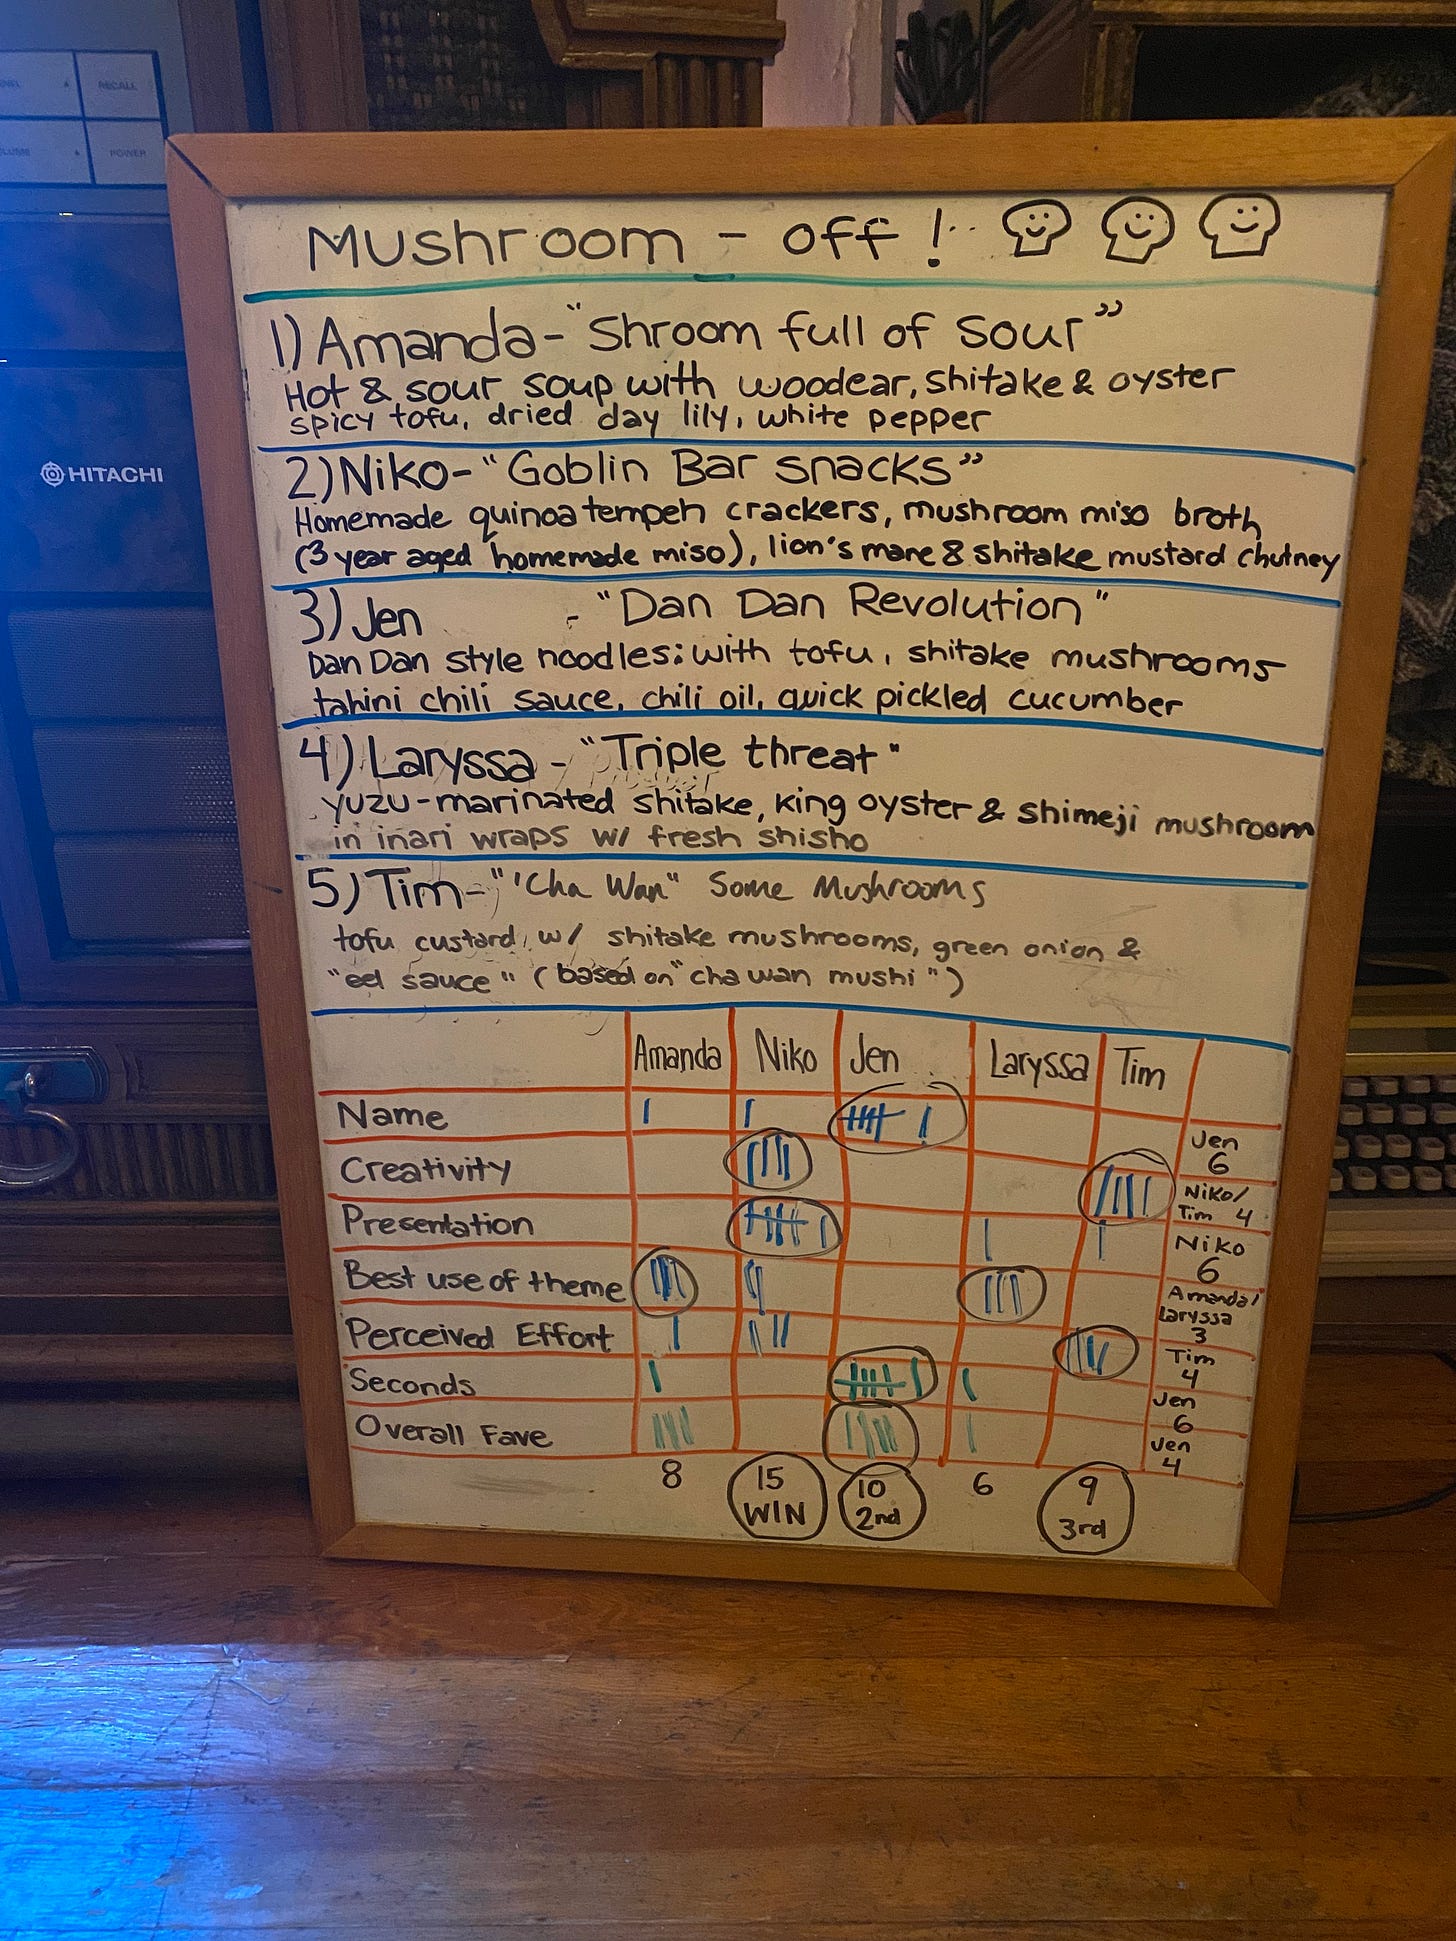 A whiteboard with the entries and scoring from the mushroom cookoff. Niko's crackers and chutney were the clear winner, with my noodles in second place.